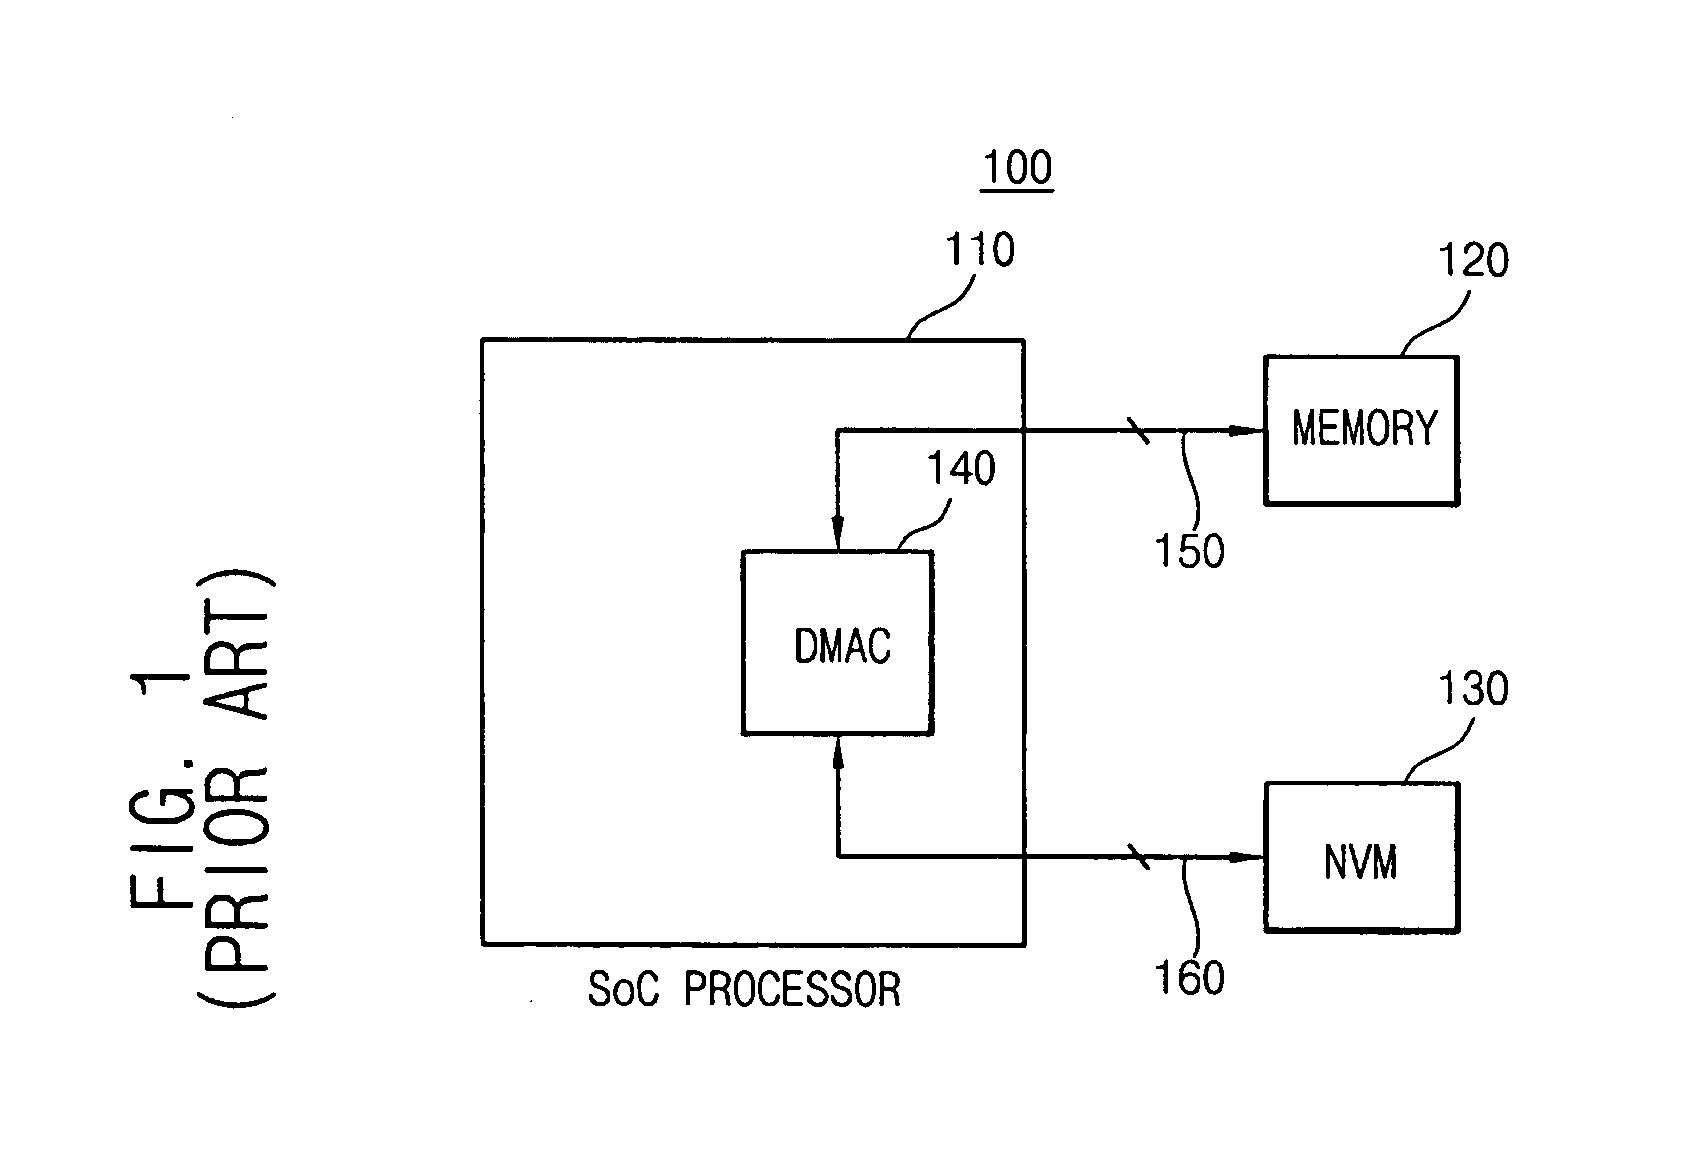 Microprocessor system with memory device including a DMAC, and a bus for DMA transfer of data between memory devices